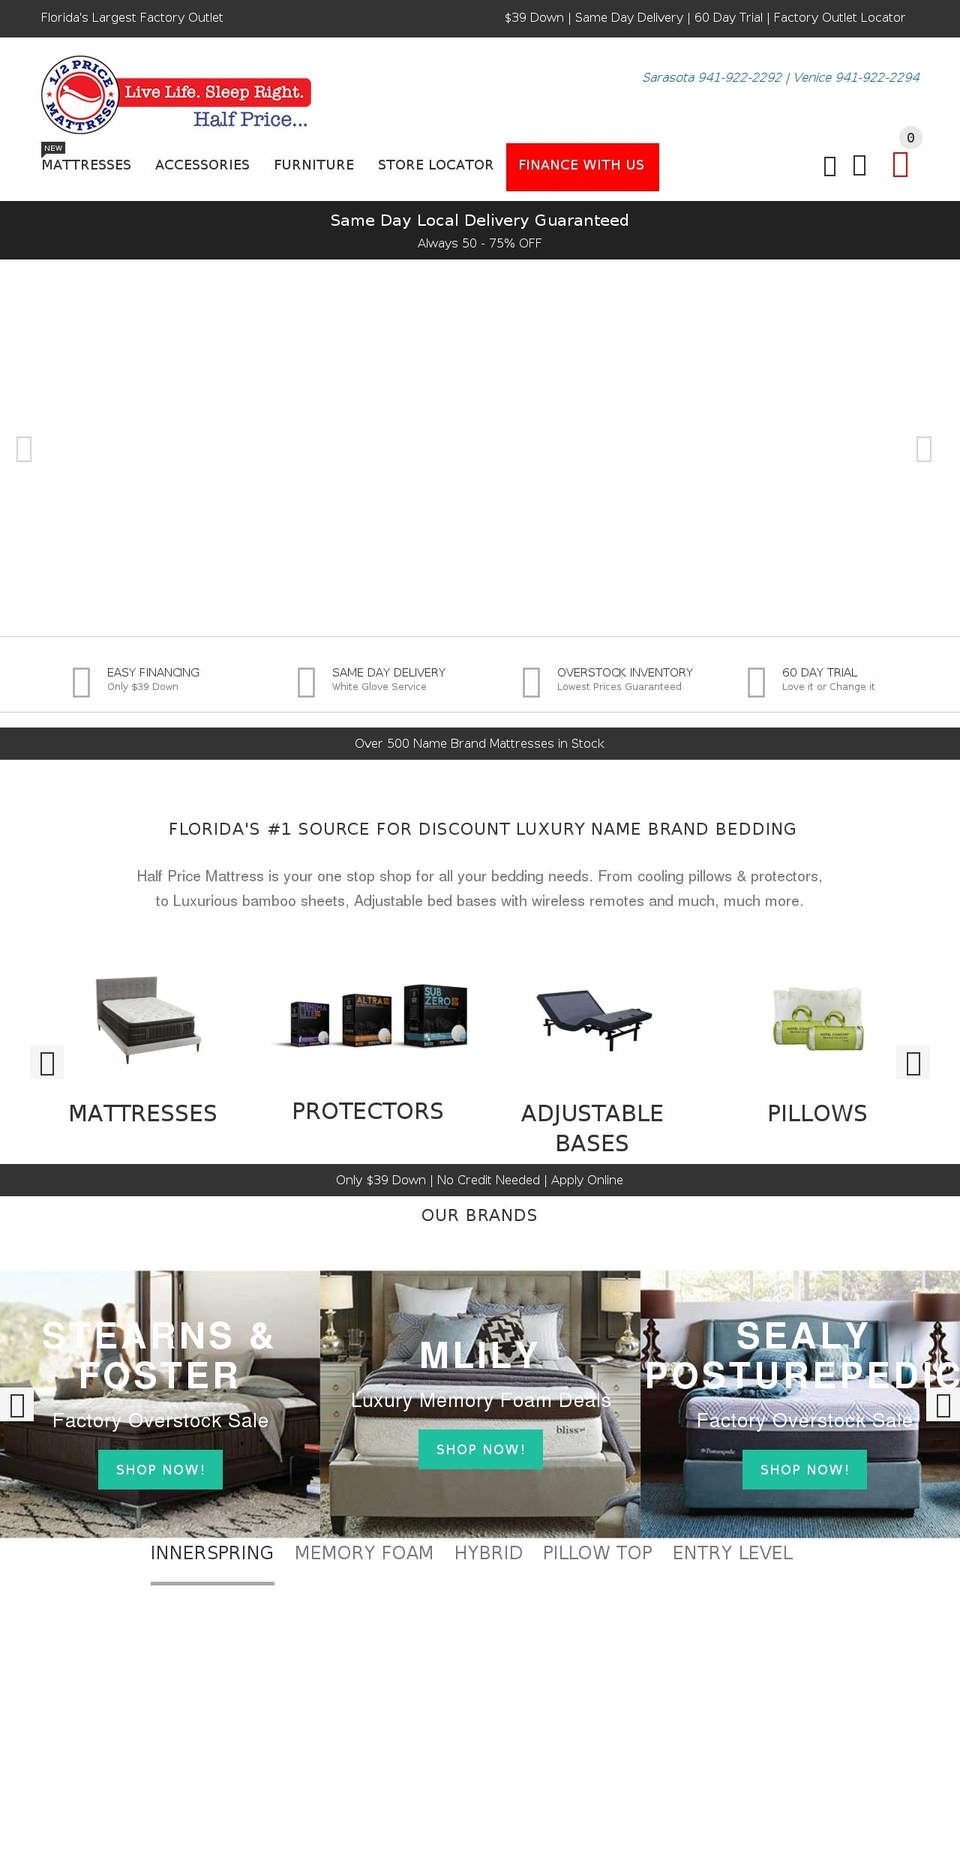 yourstore-v2-1-3 Shopify theme site example hpmattress.com